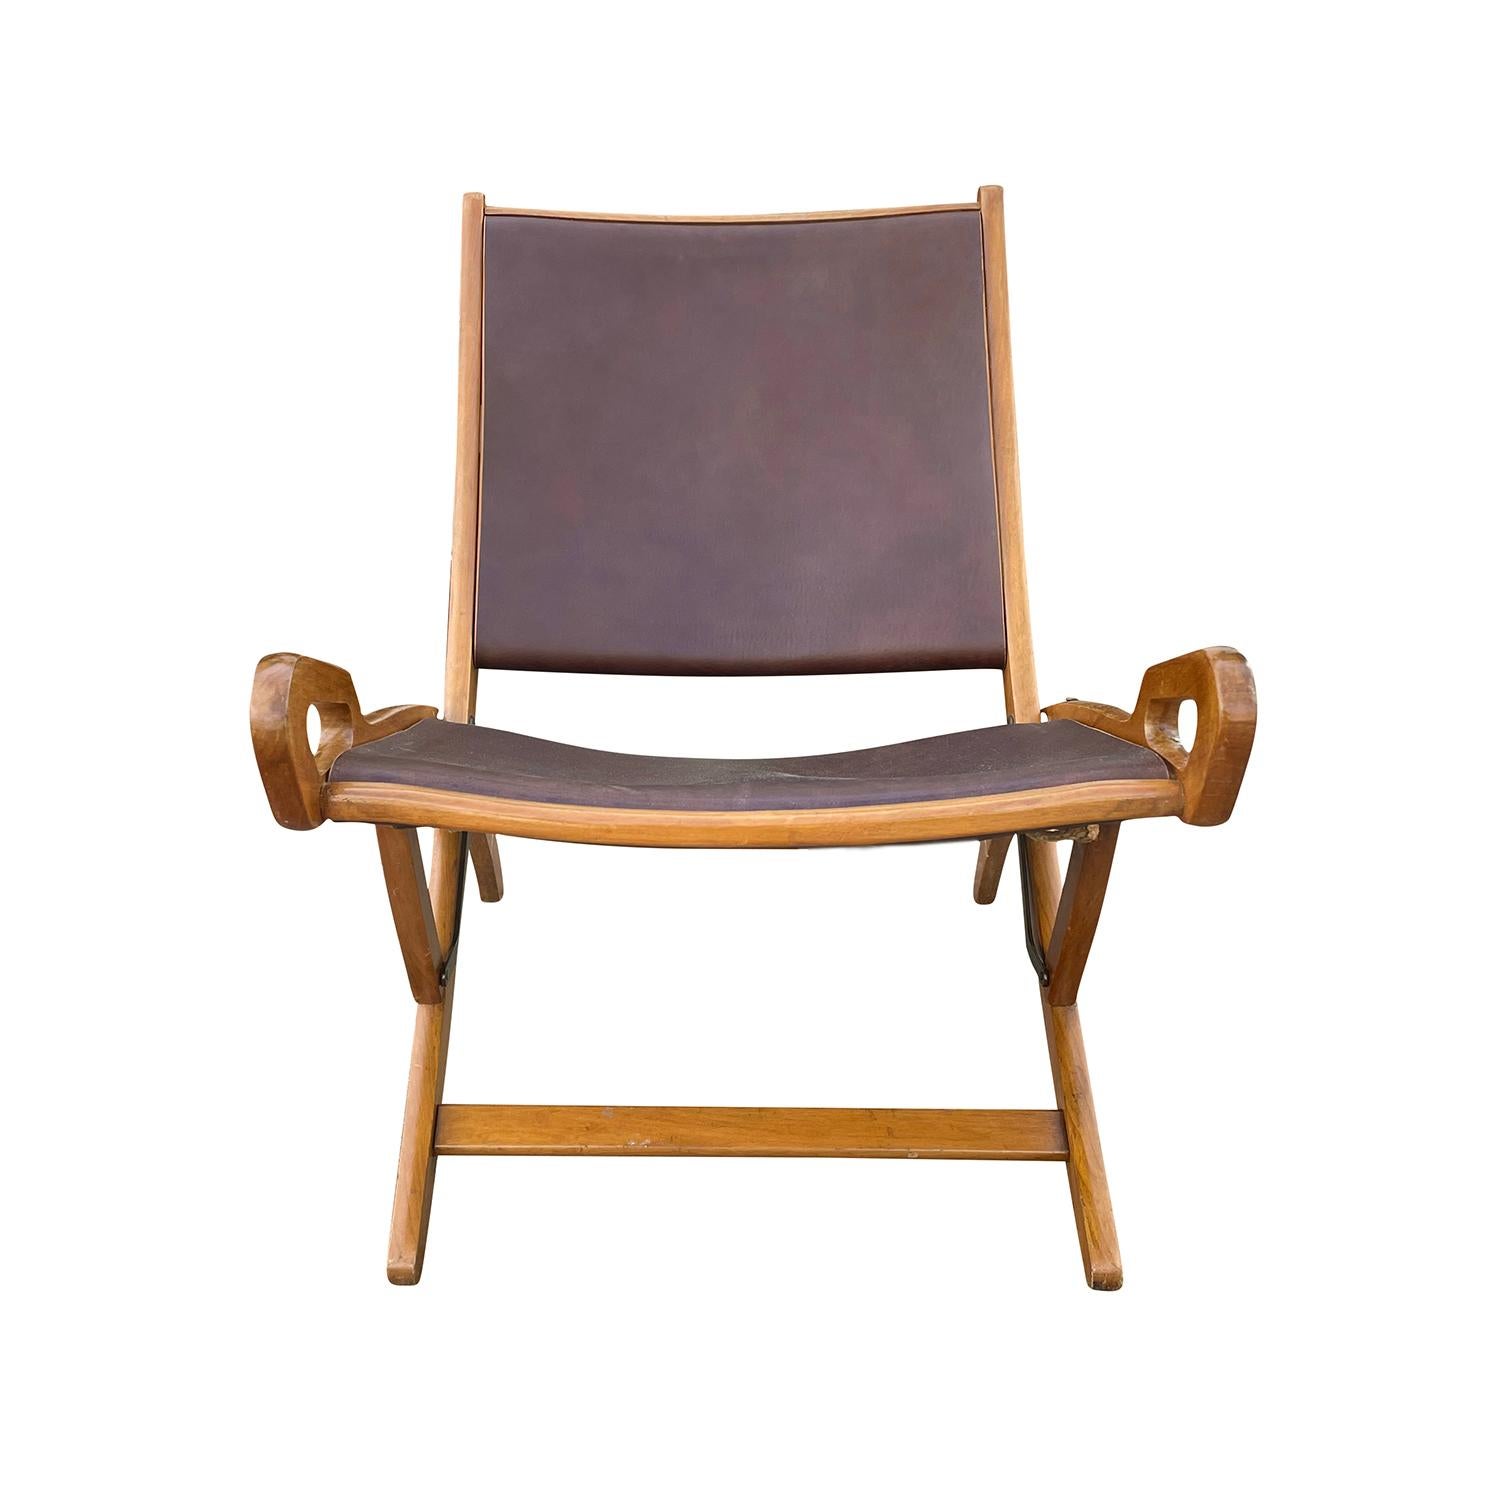 A light-brown, vintage Mid-Century Modern Italian Ninfea folding side chair made of hand crafted polished Walnut, designed by Gio Ponti, in good condition. The seat backrest of single center chair is curved and detailed with two small arched